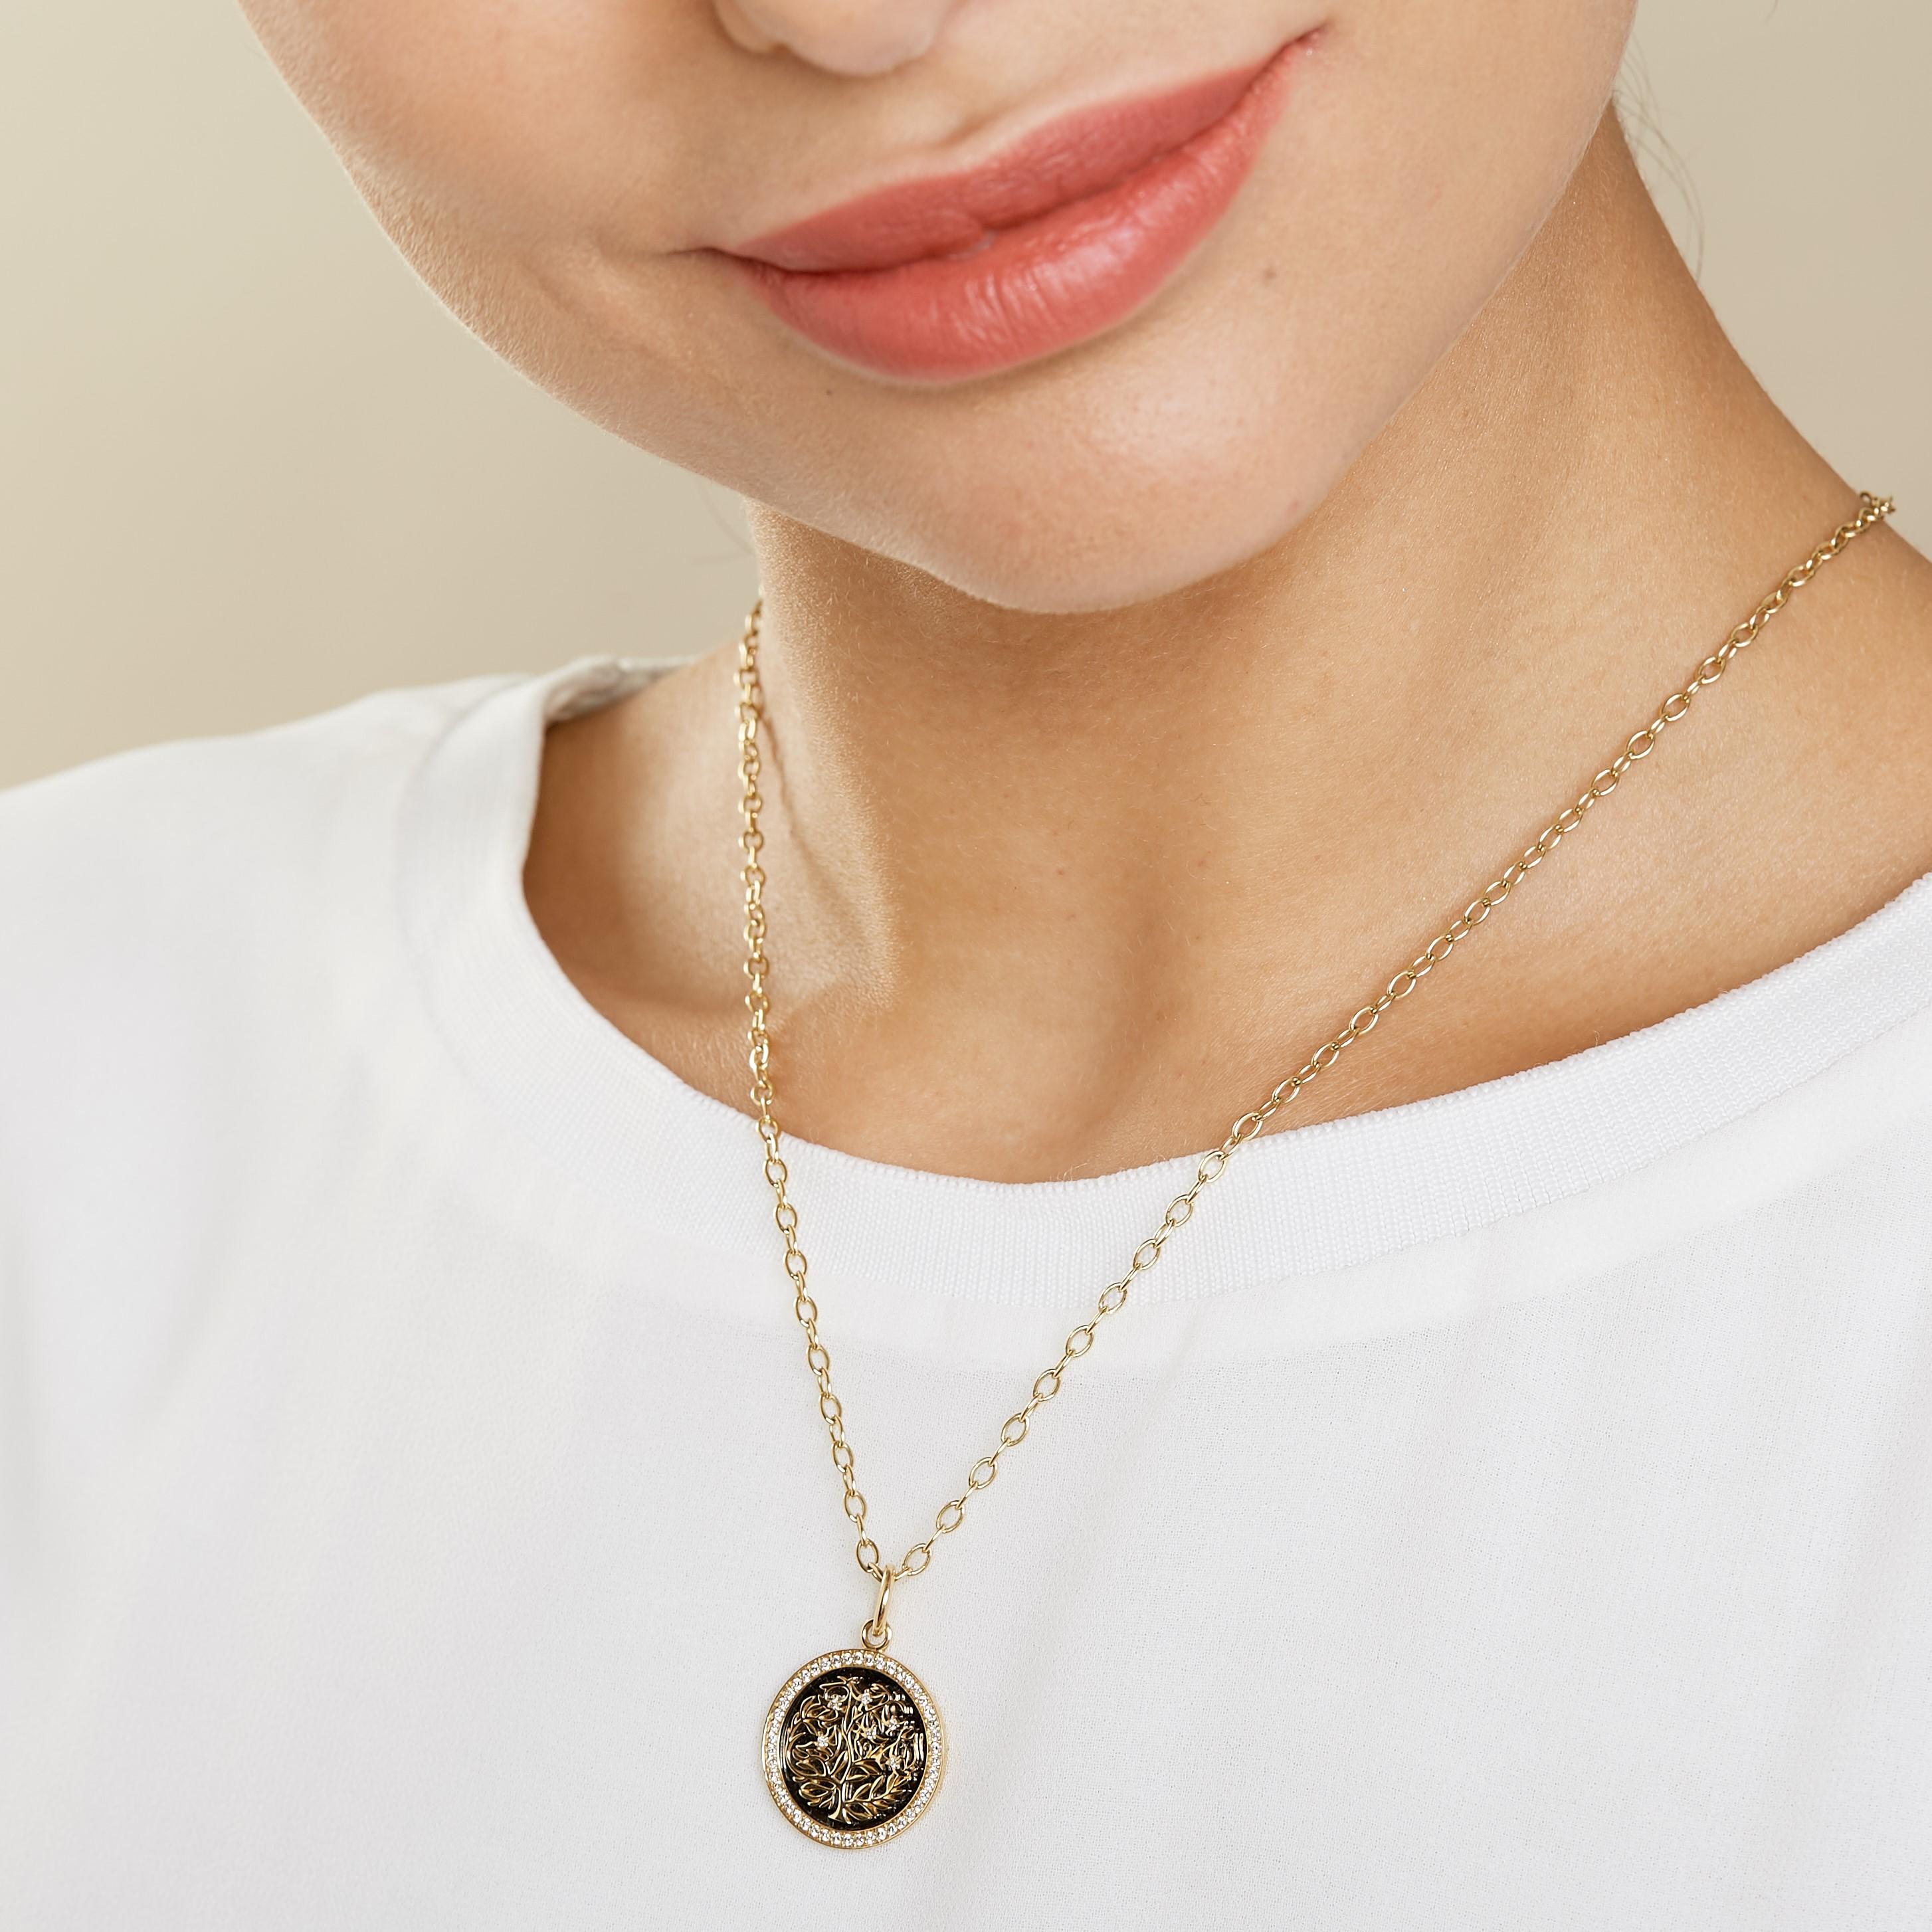 Created in 18kyg
Diamonds 0.30 cts approx
Oxidized silver base plate for contrast
Inspired from Kalpataru, the wish-fulfilling divine tree
Medallion size 20 mm
Limited edition
Chain sold separately 

Crafted with 18 karat yellow gold, this limited